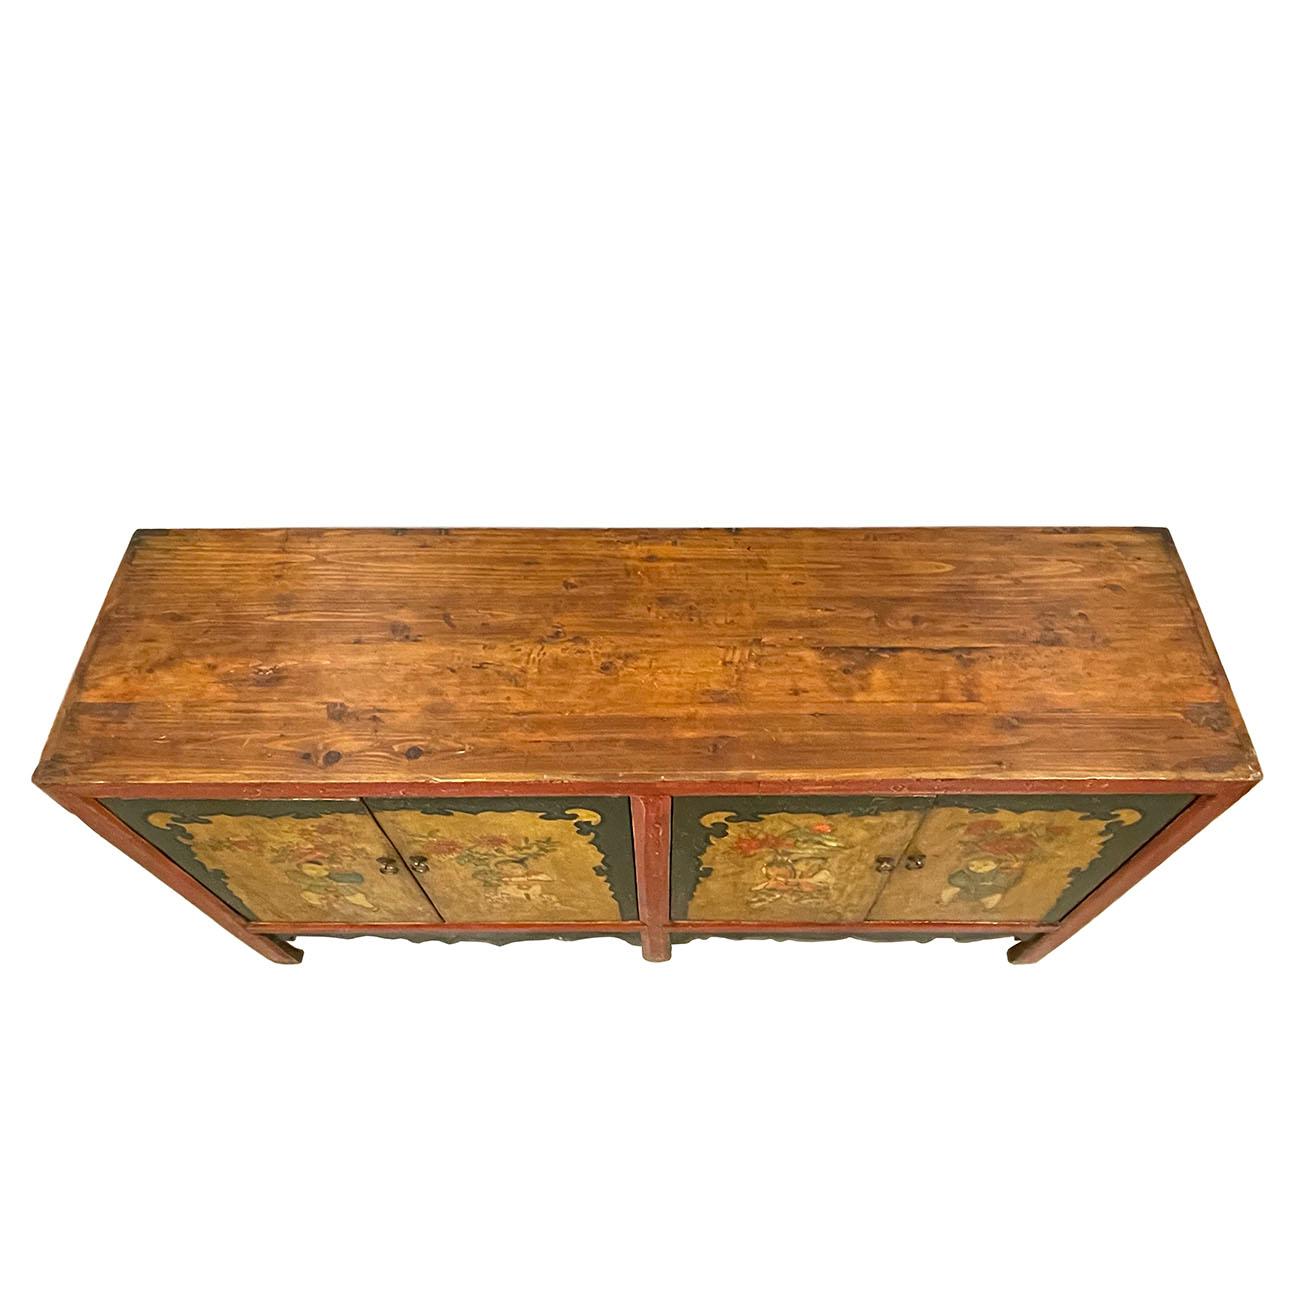 Late 19th Century Antique Chinese Mongolia Credenza, Sideboard, Buffet Table For Sale 3